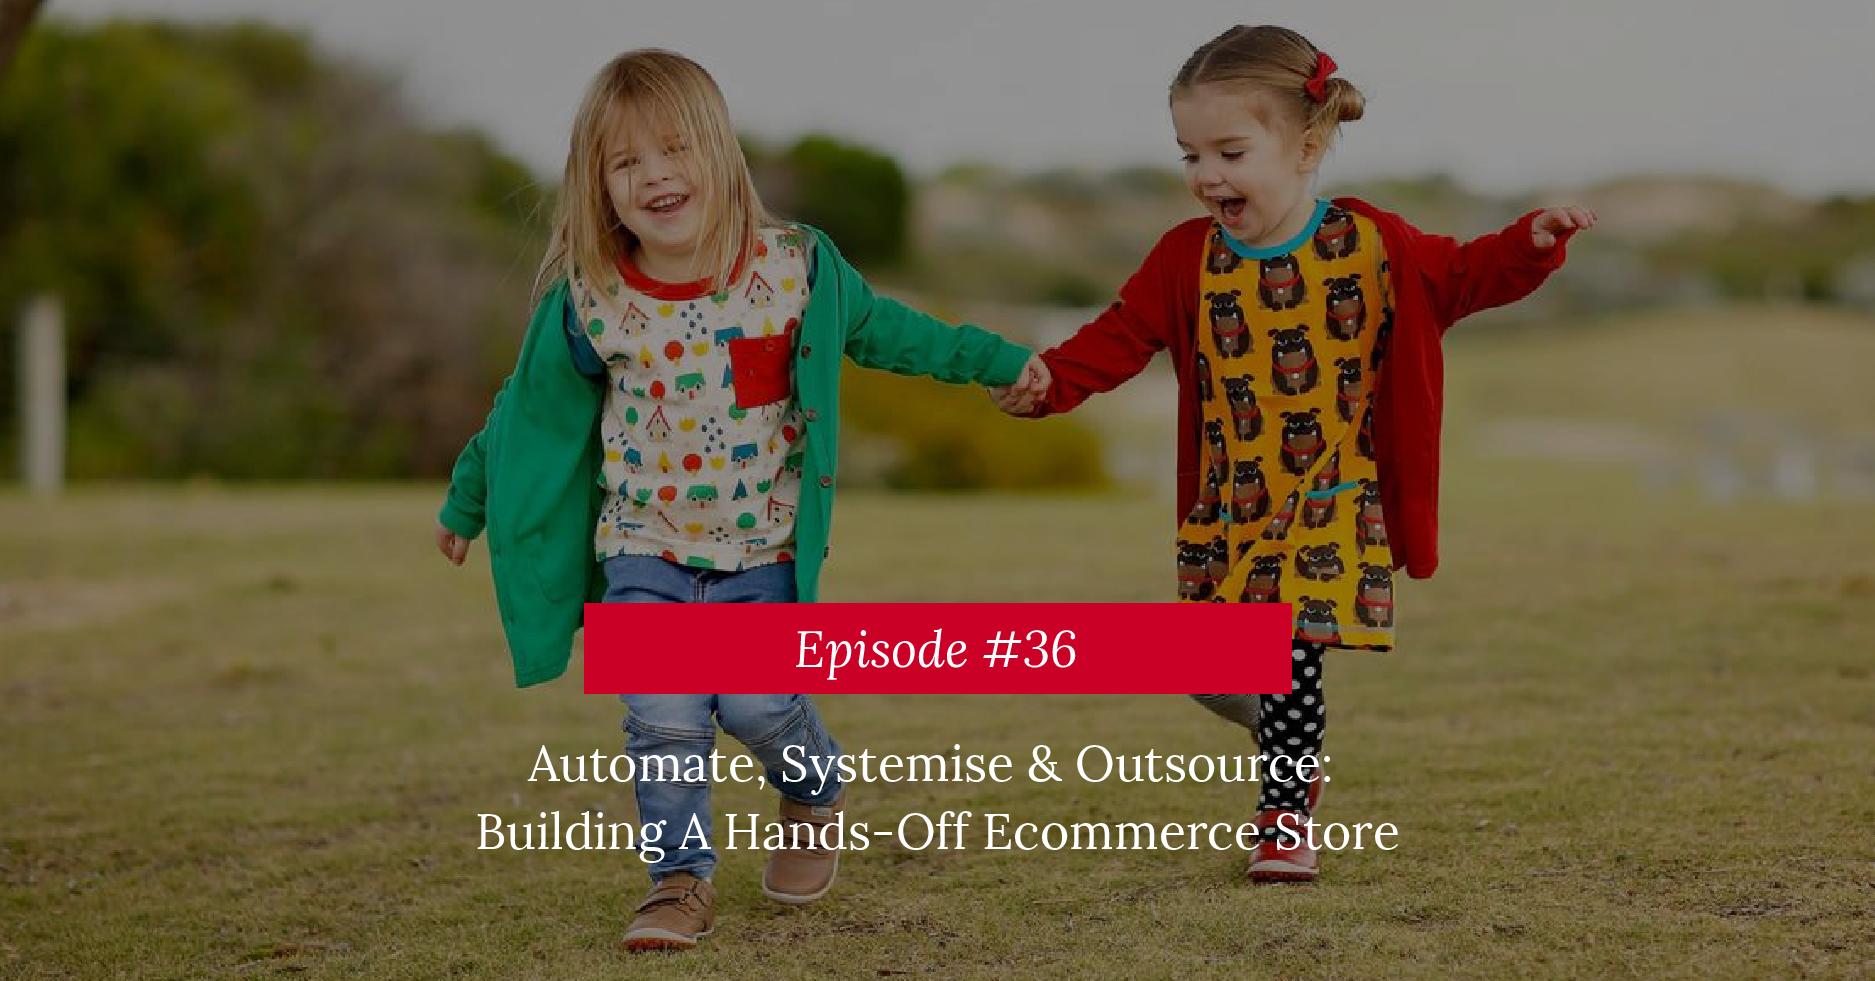 Automate, Systemise & Outsource: Building A Hands-Off Ecommerce Store